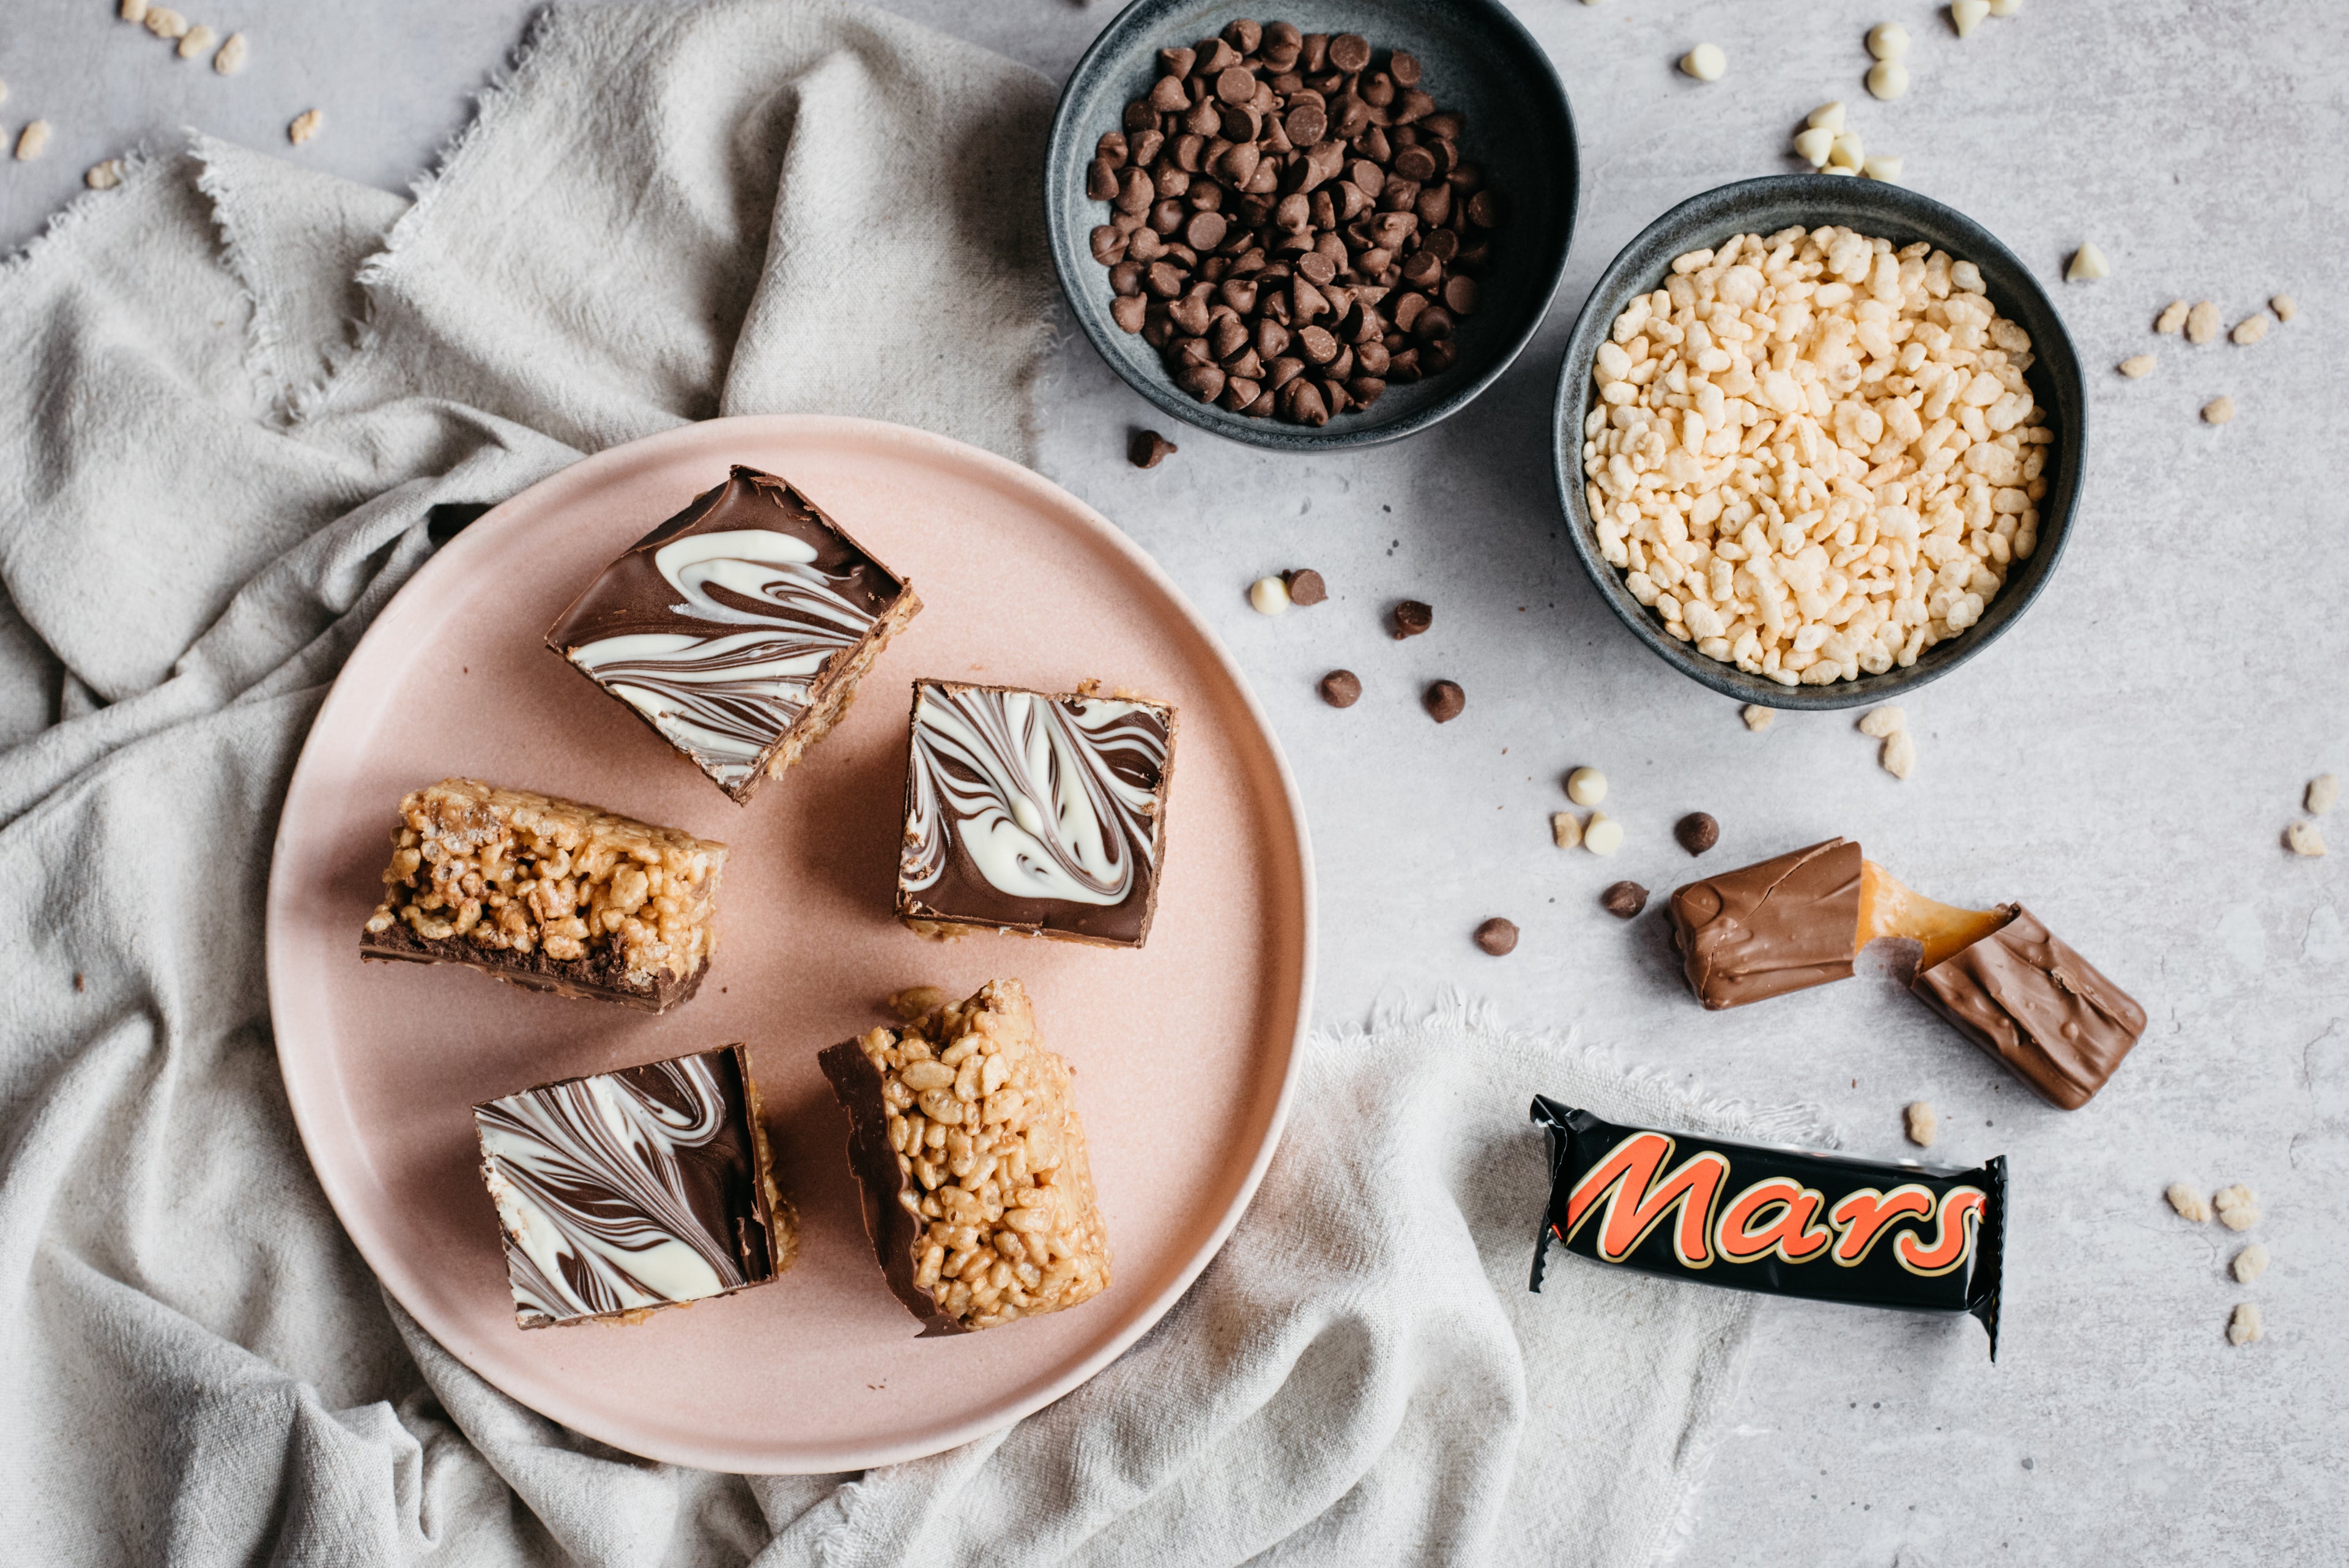 Mars Bar cakes made with Rice Krispies and topped with milk and white chocolate